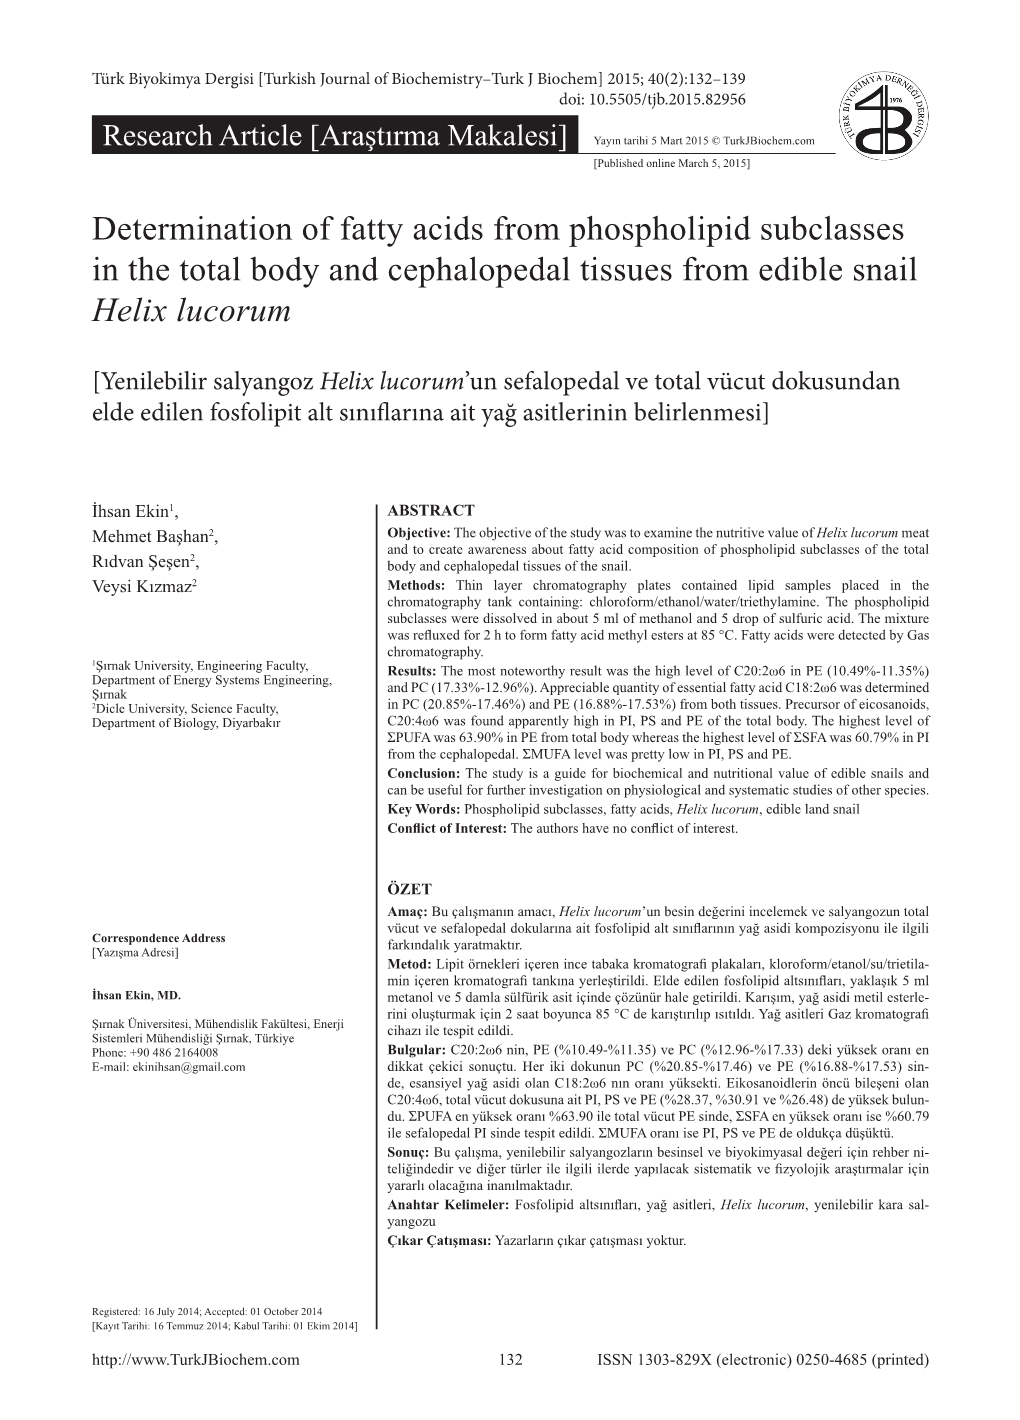 Determination of Fatty Acids from Phospholipid Subclasses in the Total Body and Cephalopedal Tissues from Edible Snail Helix Lucorum